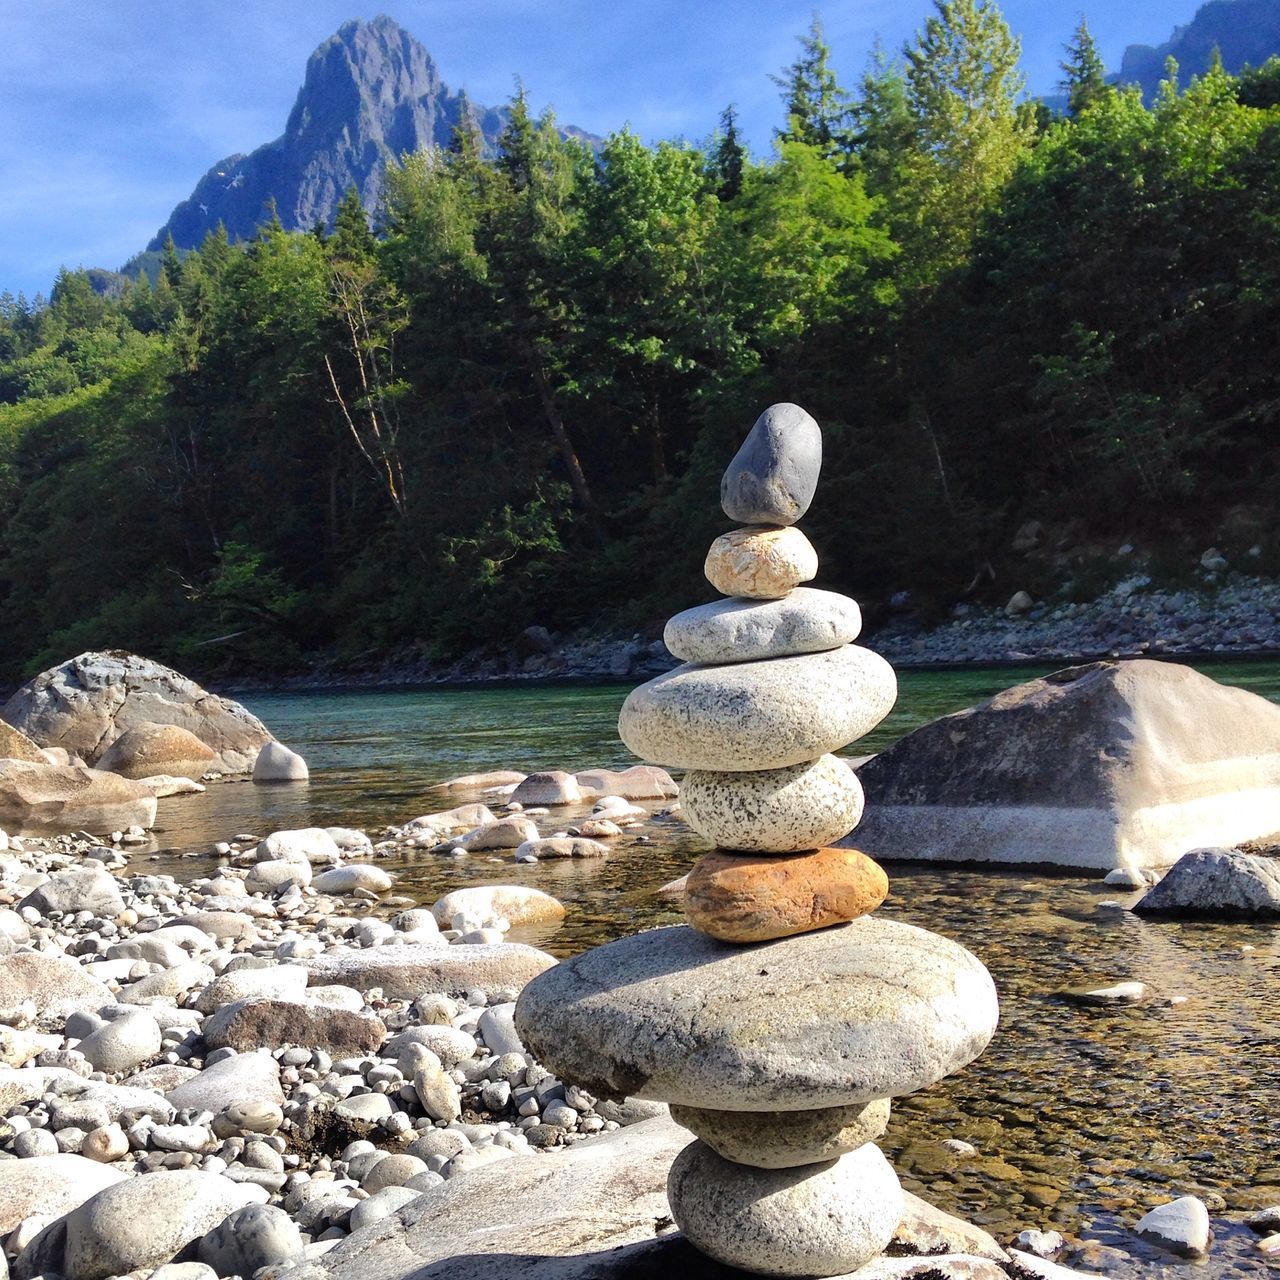 rock - object, water, stone - object, tranquility, stack, balance, tranquil scene, nature, mountain, beauty in nature, sky, scenics, rock, rock formation, stone, lake, tree, pebble, idyllic, day